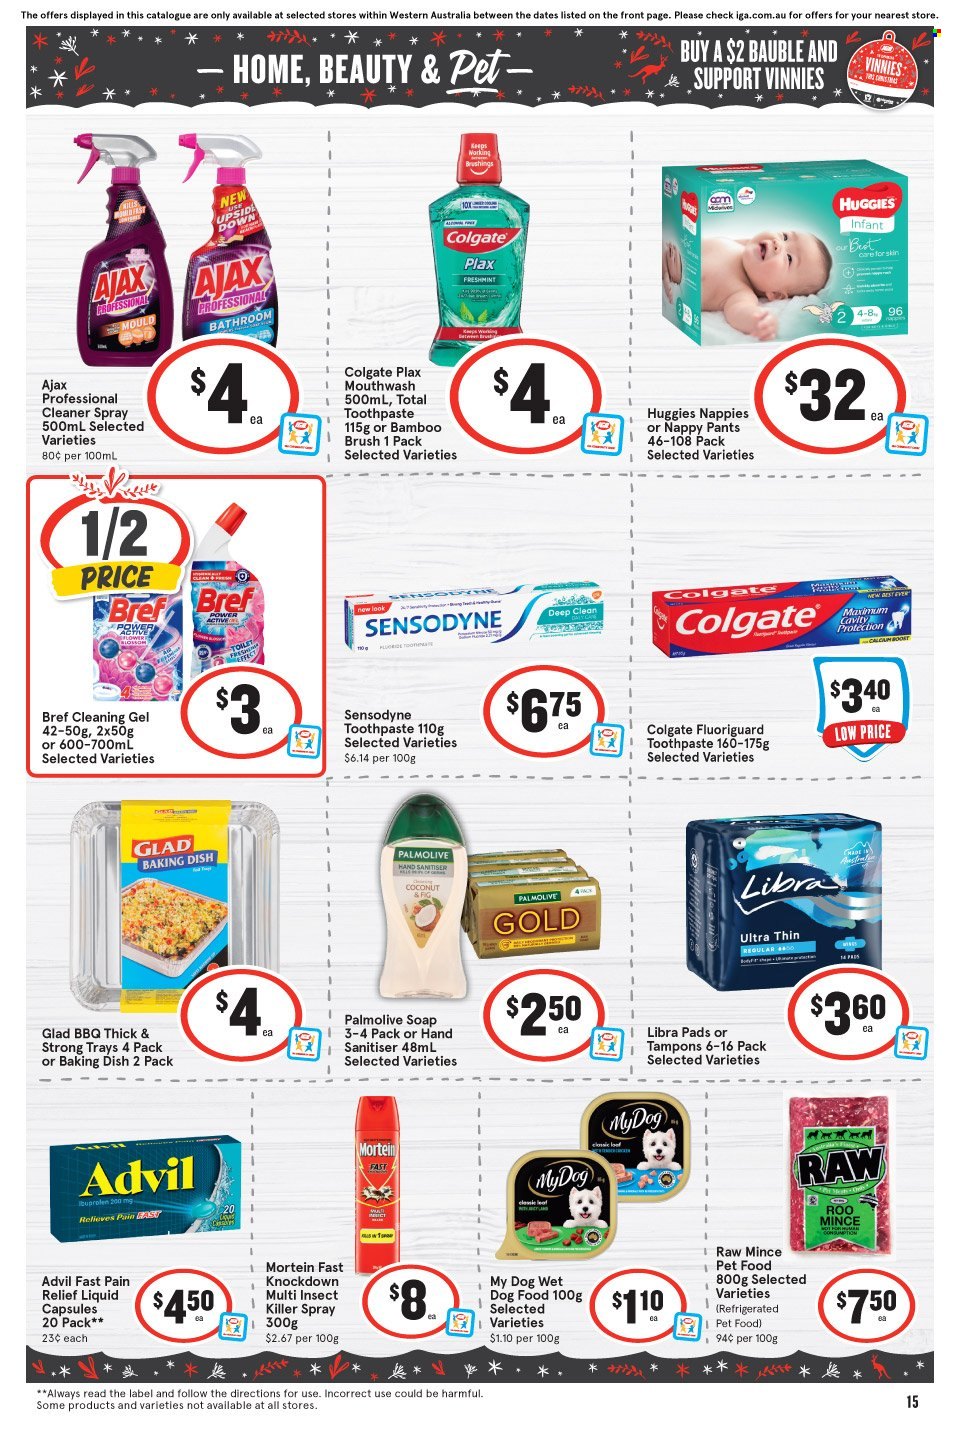 thumbnail - IGA Catalogue - 7 Dec 2022 - 13 Dec 2022 - Sales products - Huggies, pants, nappies, cleaner, Mortein, Ajax, Palmolive, soap, Colgate, toothpaste, Sensodyne, mouthwash, Plax, tampons, insect killer, brush, bauble, animal food, dog food, wet dog food, pain relief, Ibuprofen, Advil Rapid. Page 16.